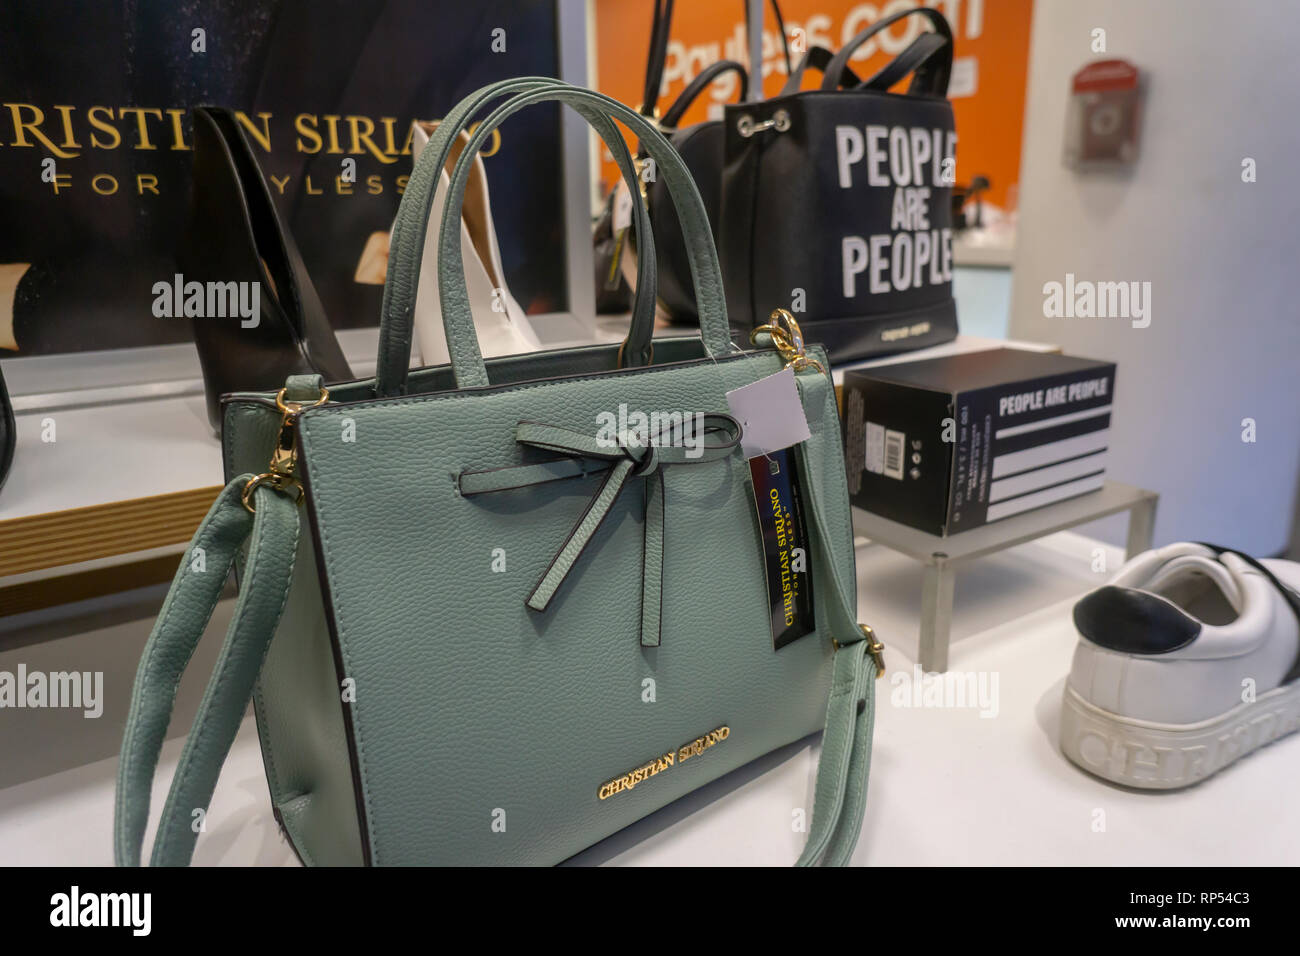 Designer Christian Siriano leather goods in a Payless ShoeSource store in Herald Square in New York on Monday, February 18, 2019. The retailer is closing all of its 2100 stores in the U.S. and Puerto Rico, and its Payless.com website, as it files for bankruptcy. (Â© Richard B. Levine) Stock Photo